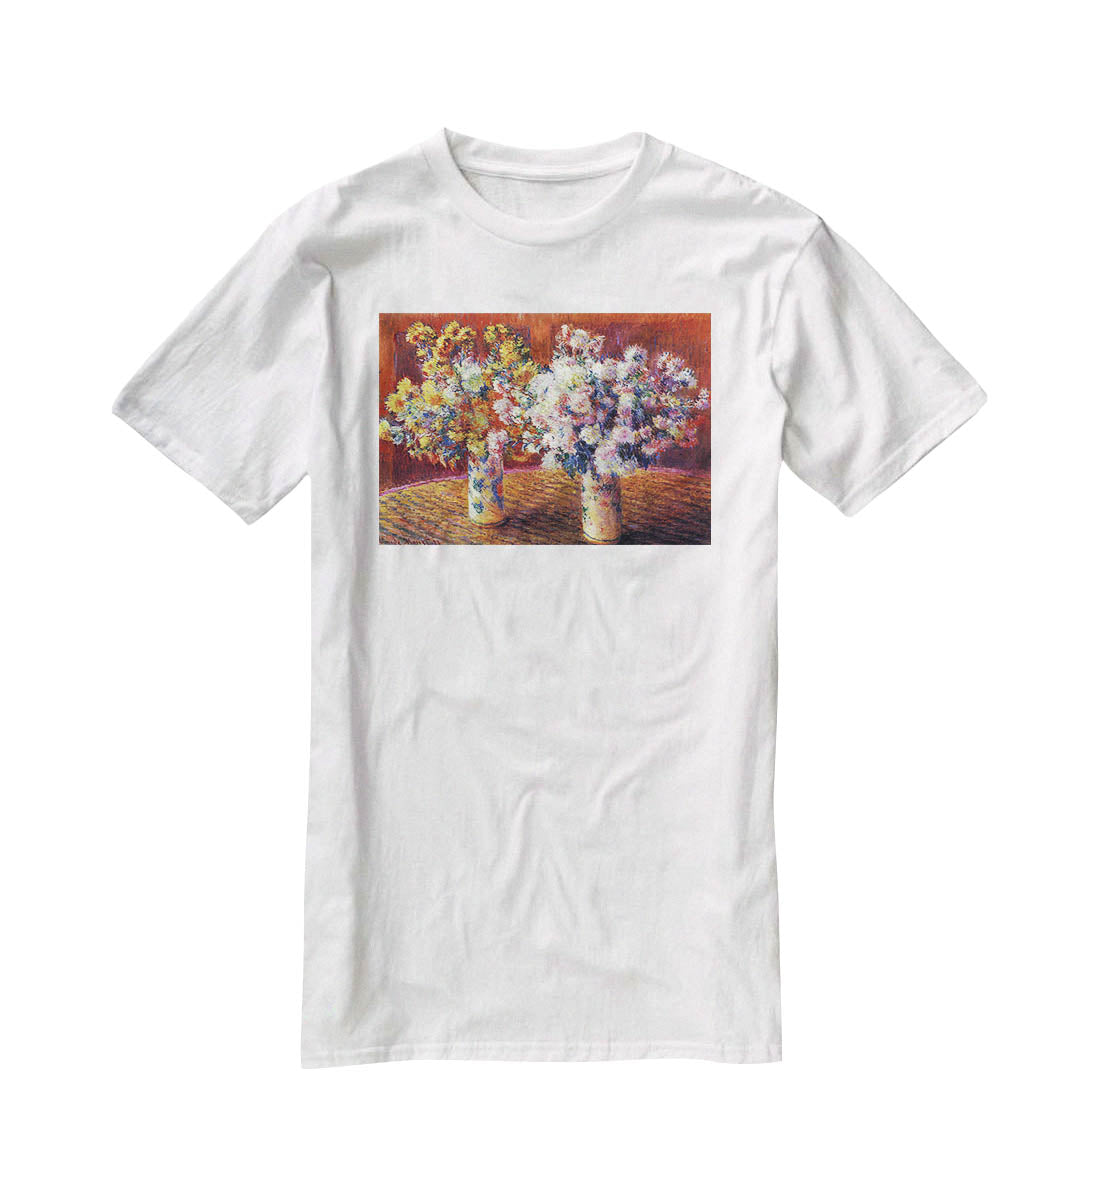 Two vases with Chrysanthemums by Monet T-Shirt - Canvas Art Rocks - 5